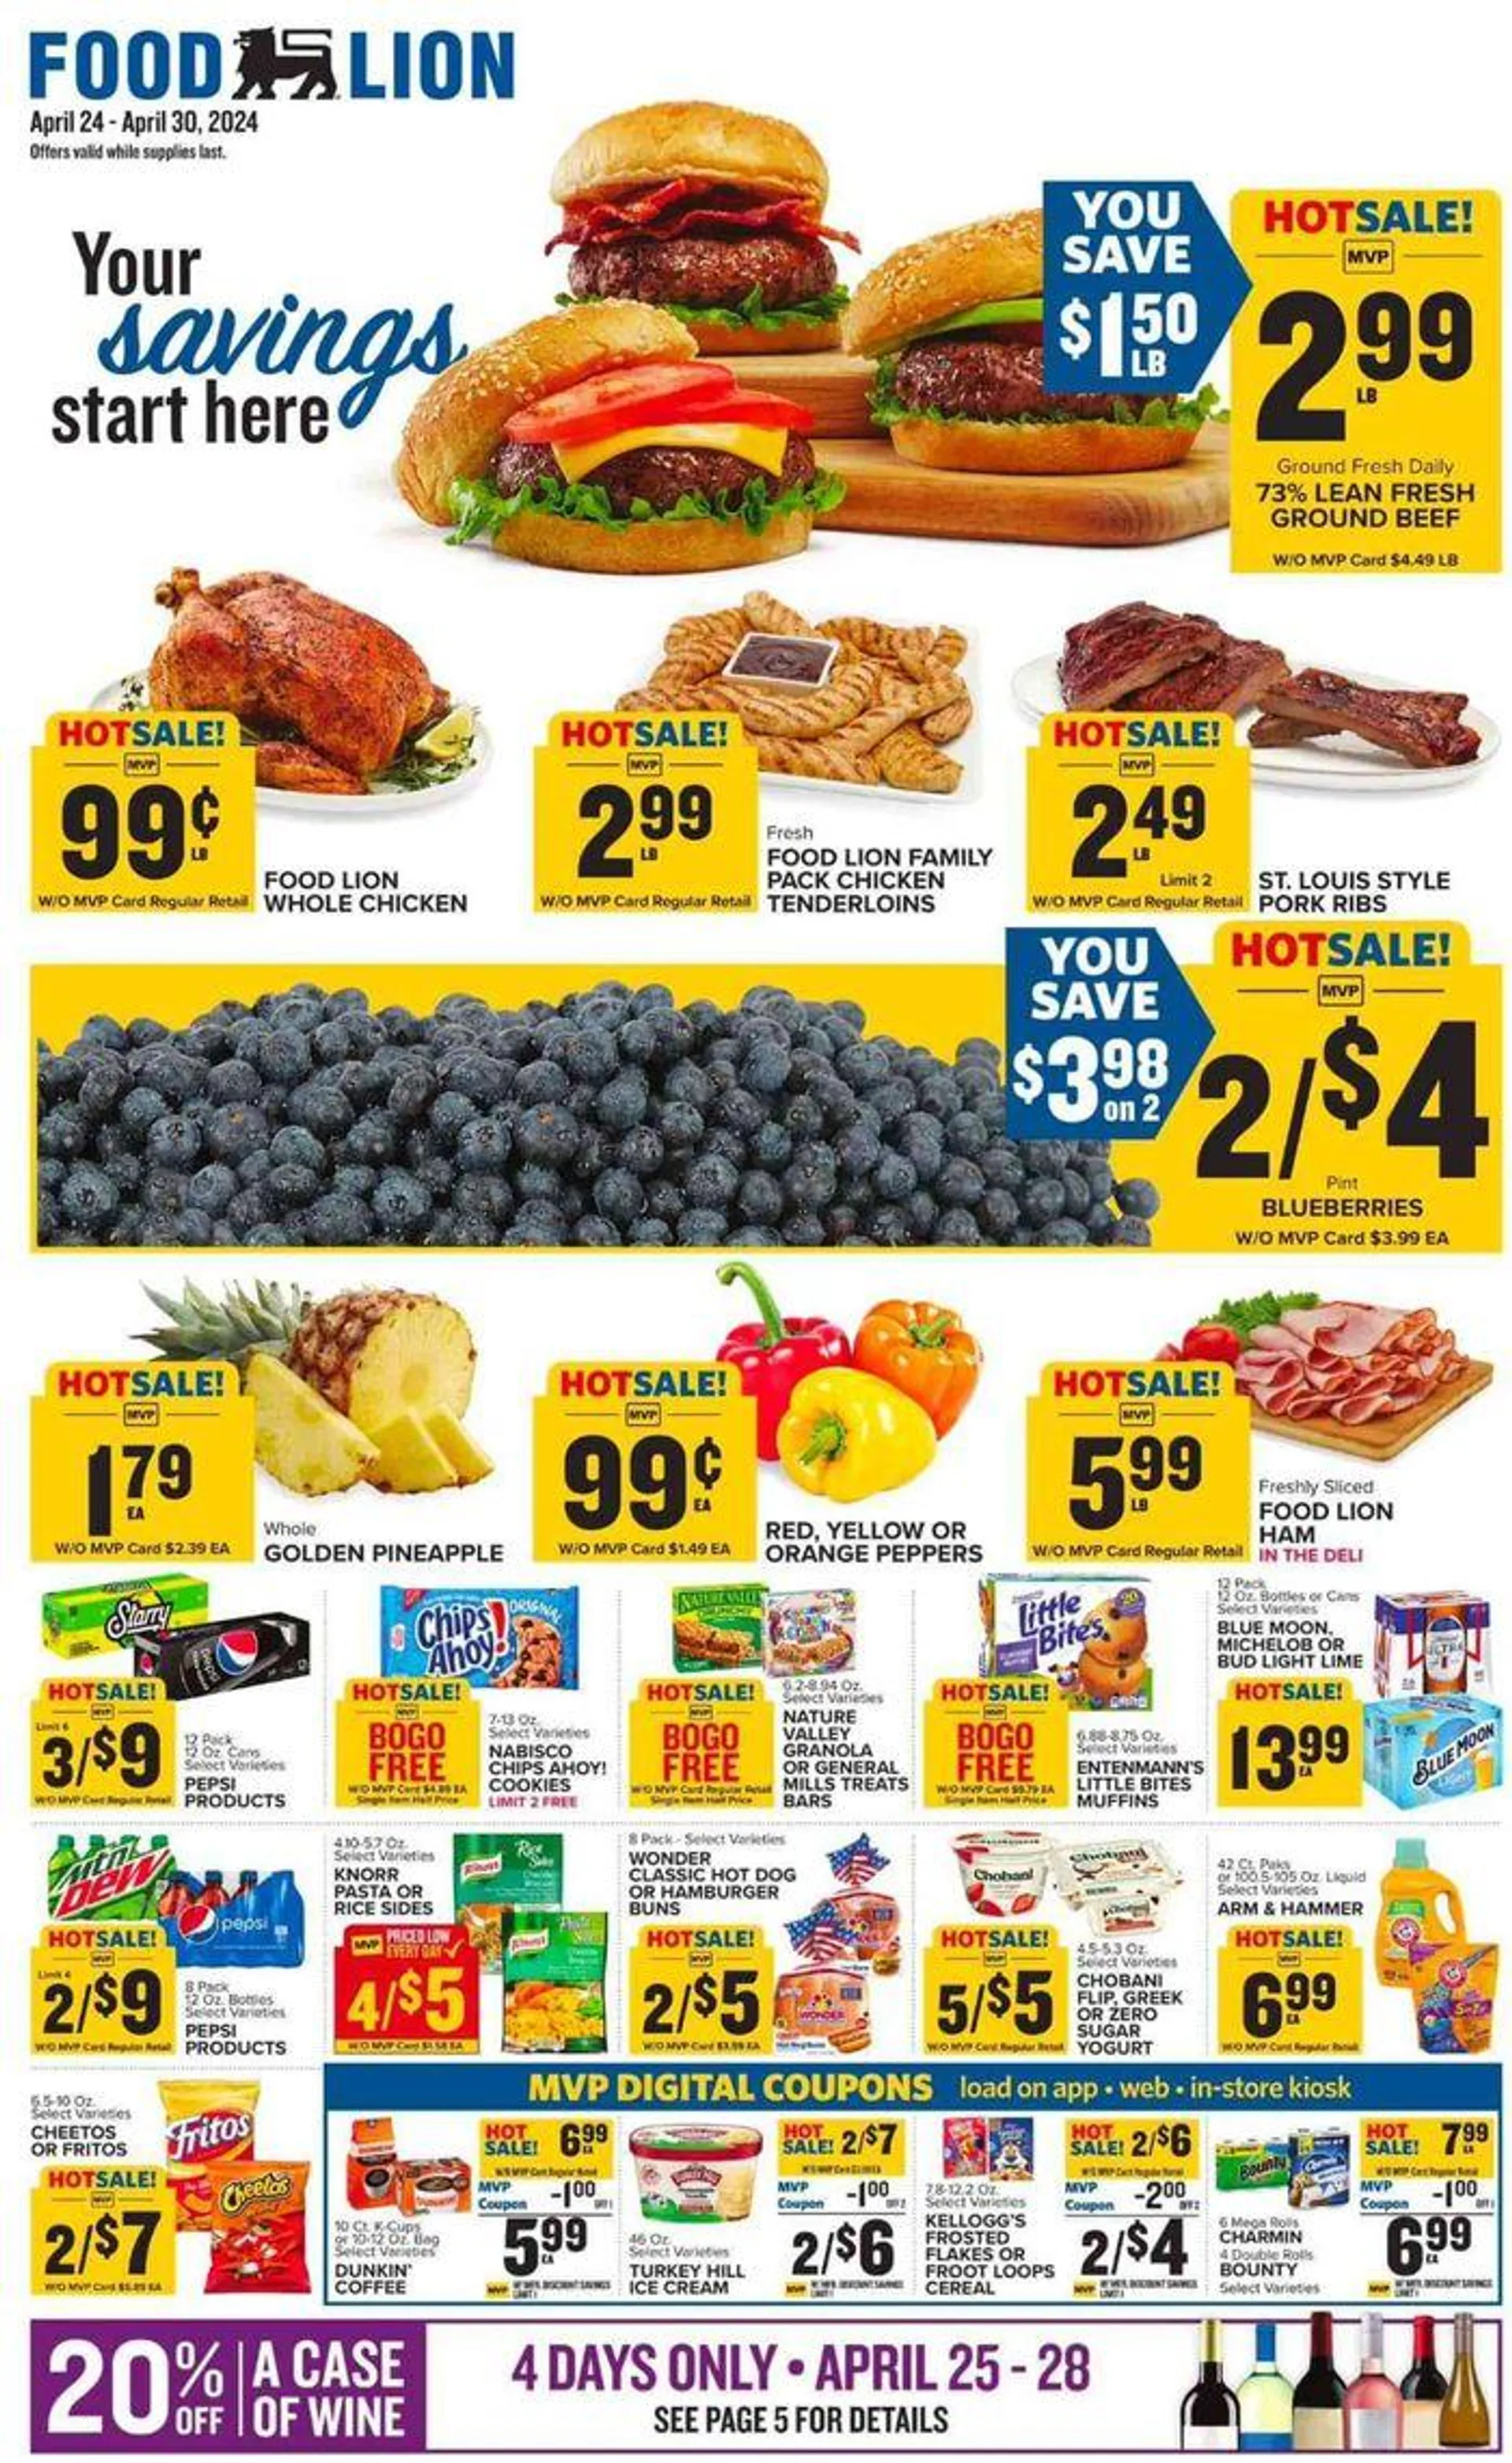 Weekly Ads Food Lion - 1